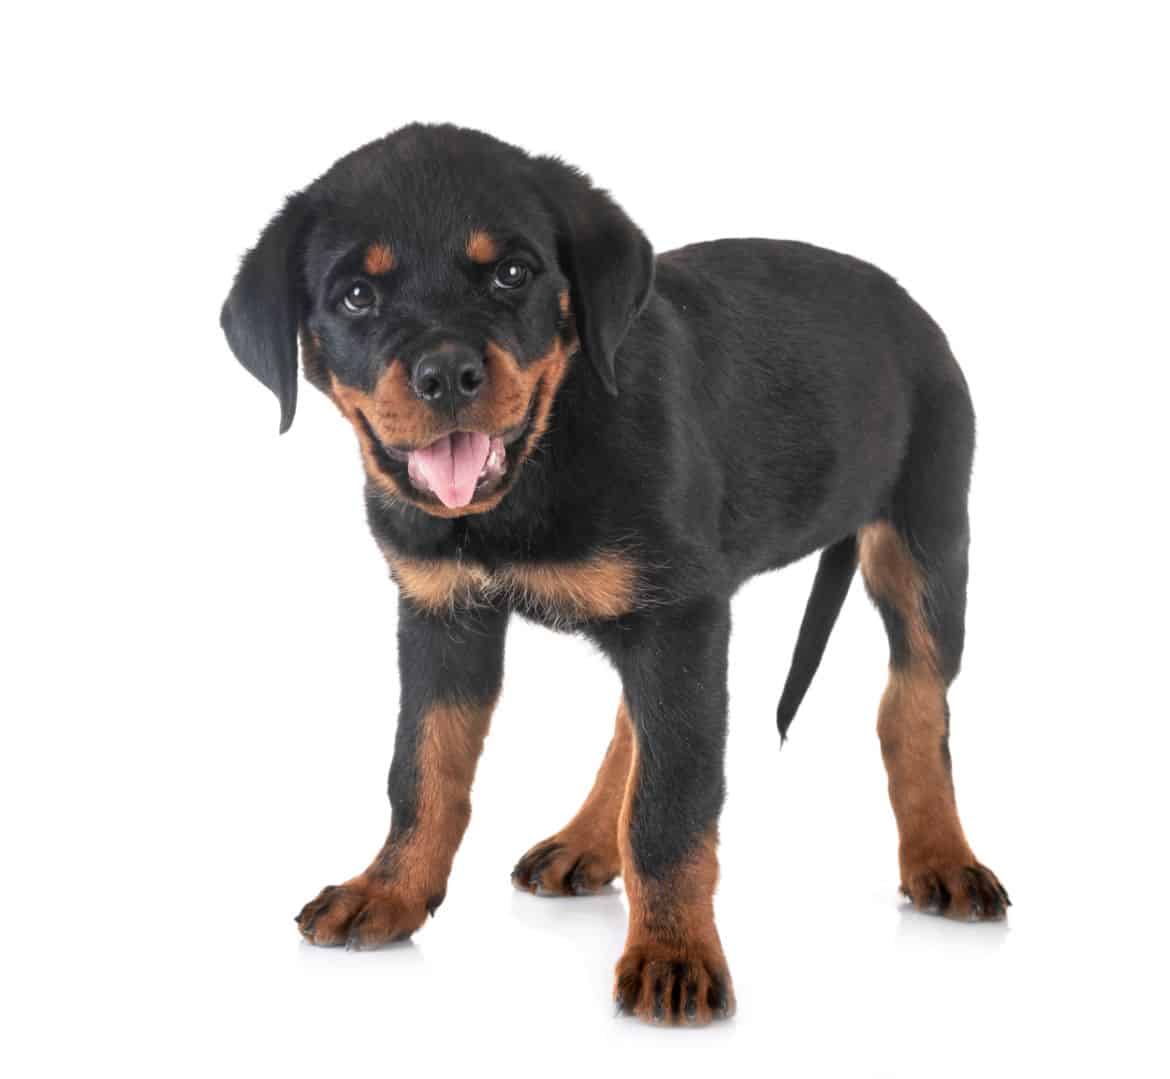 Why does my Rottweiler walk behind me?